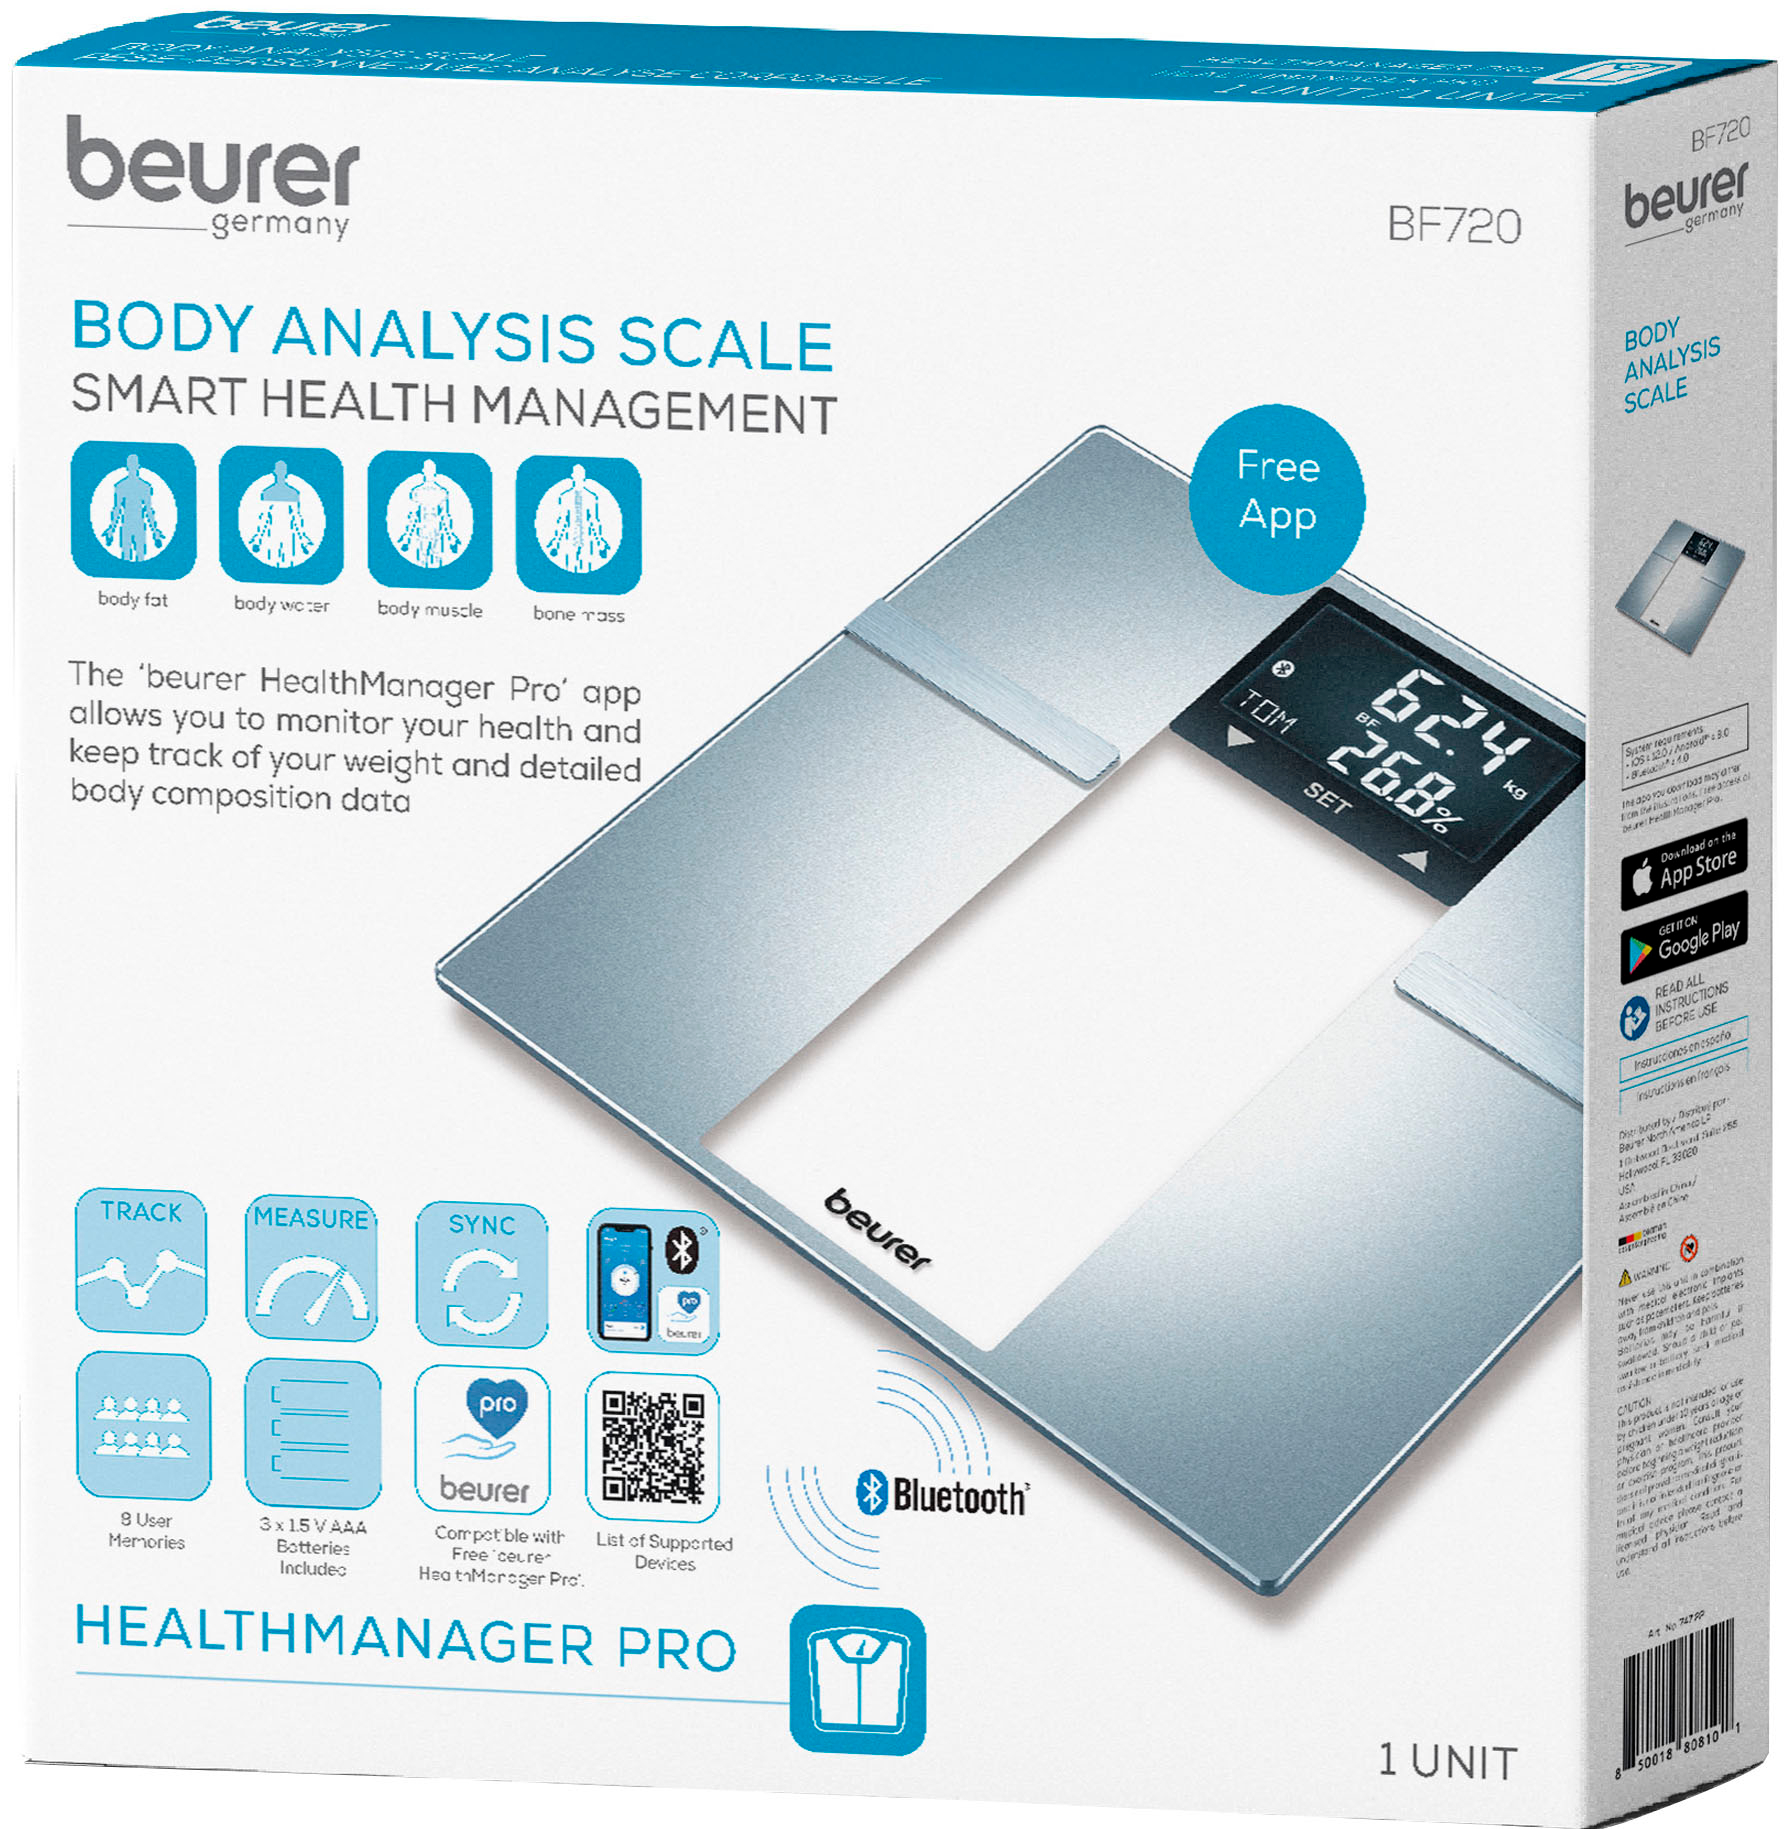 Beurer Body Fat Scale, Body Weight, Body Fat, Body Water & More